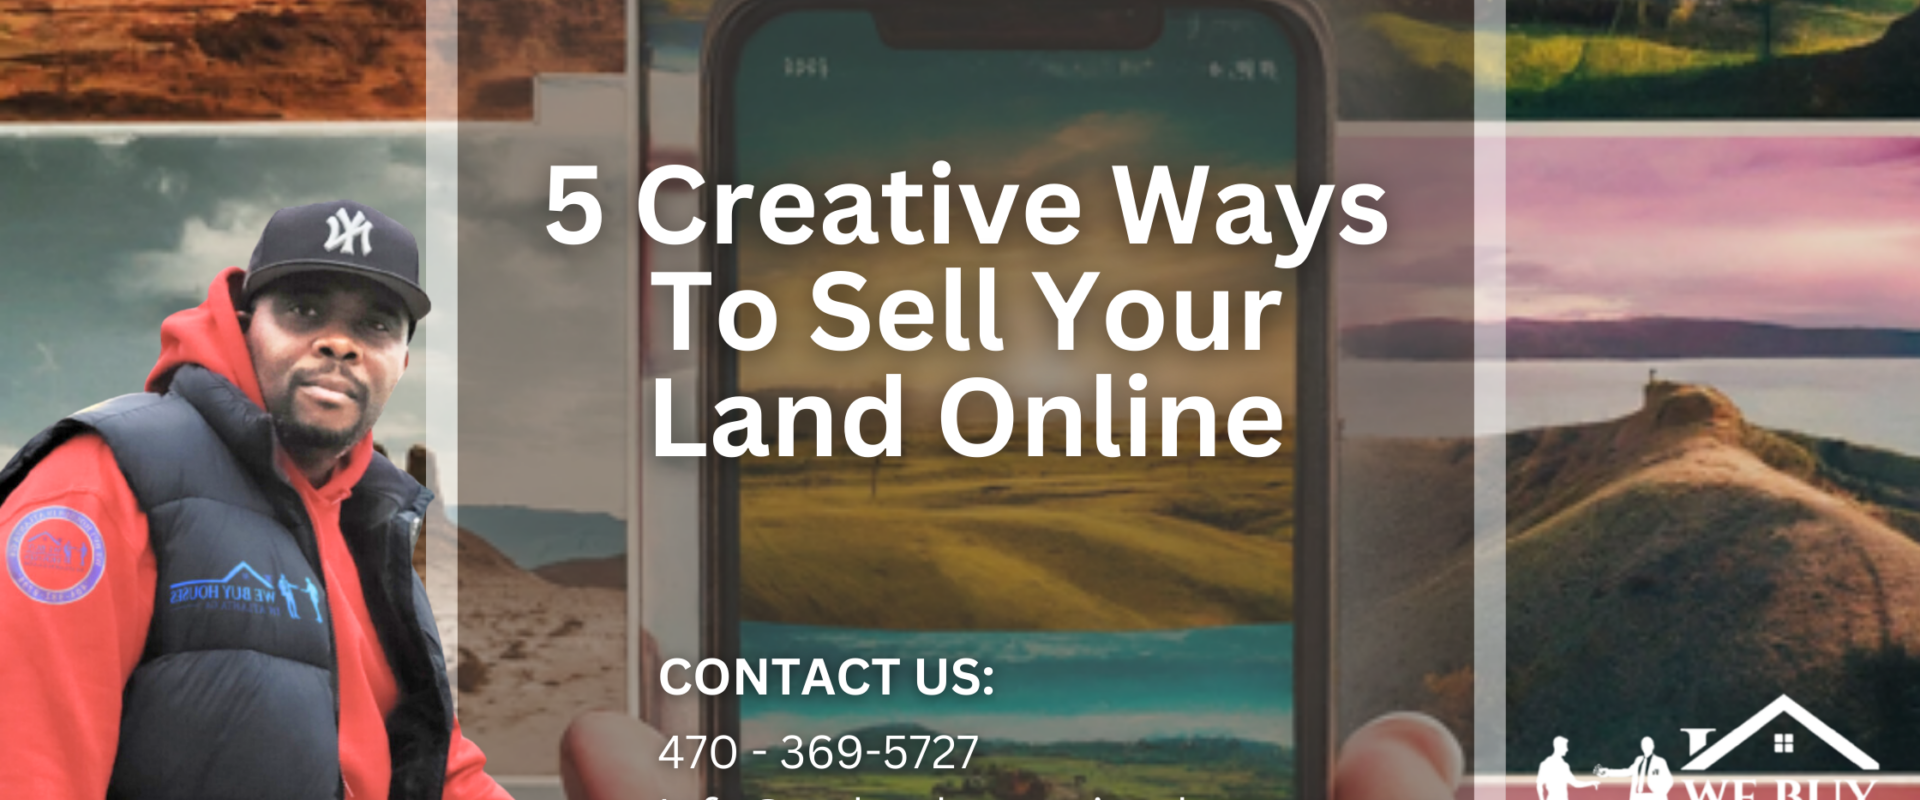 5 Creative Ways To Sell Your Land Online